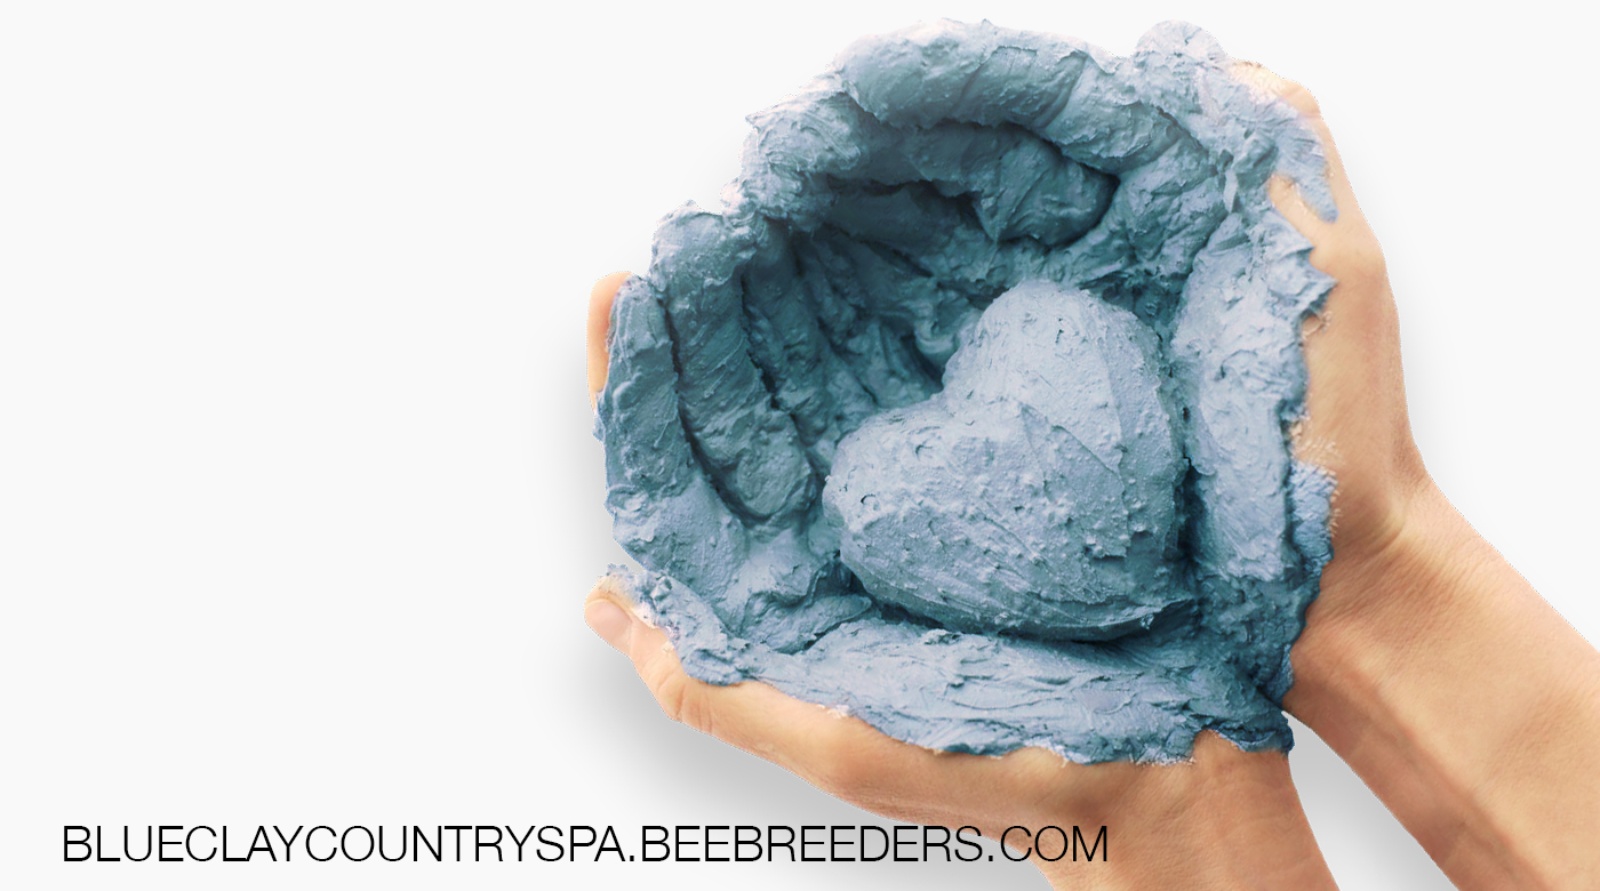 Blue Clay Country Spa architecture competition